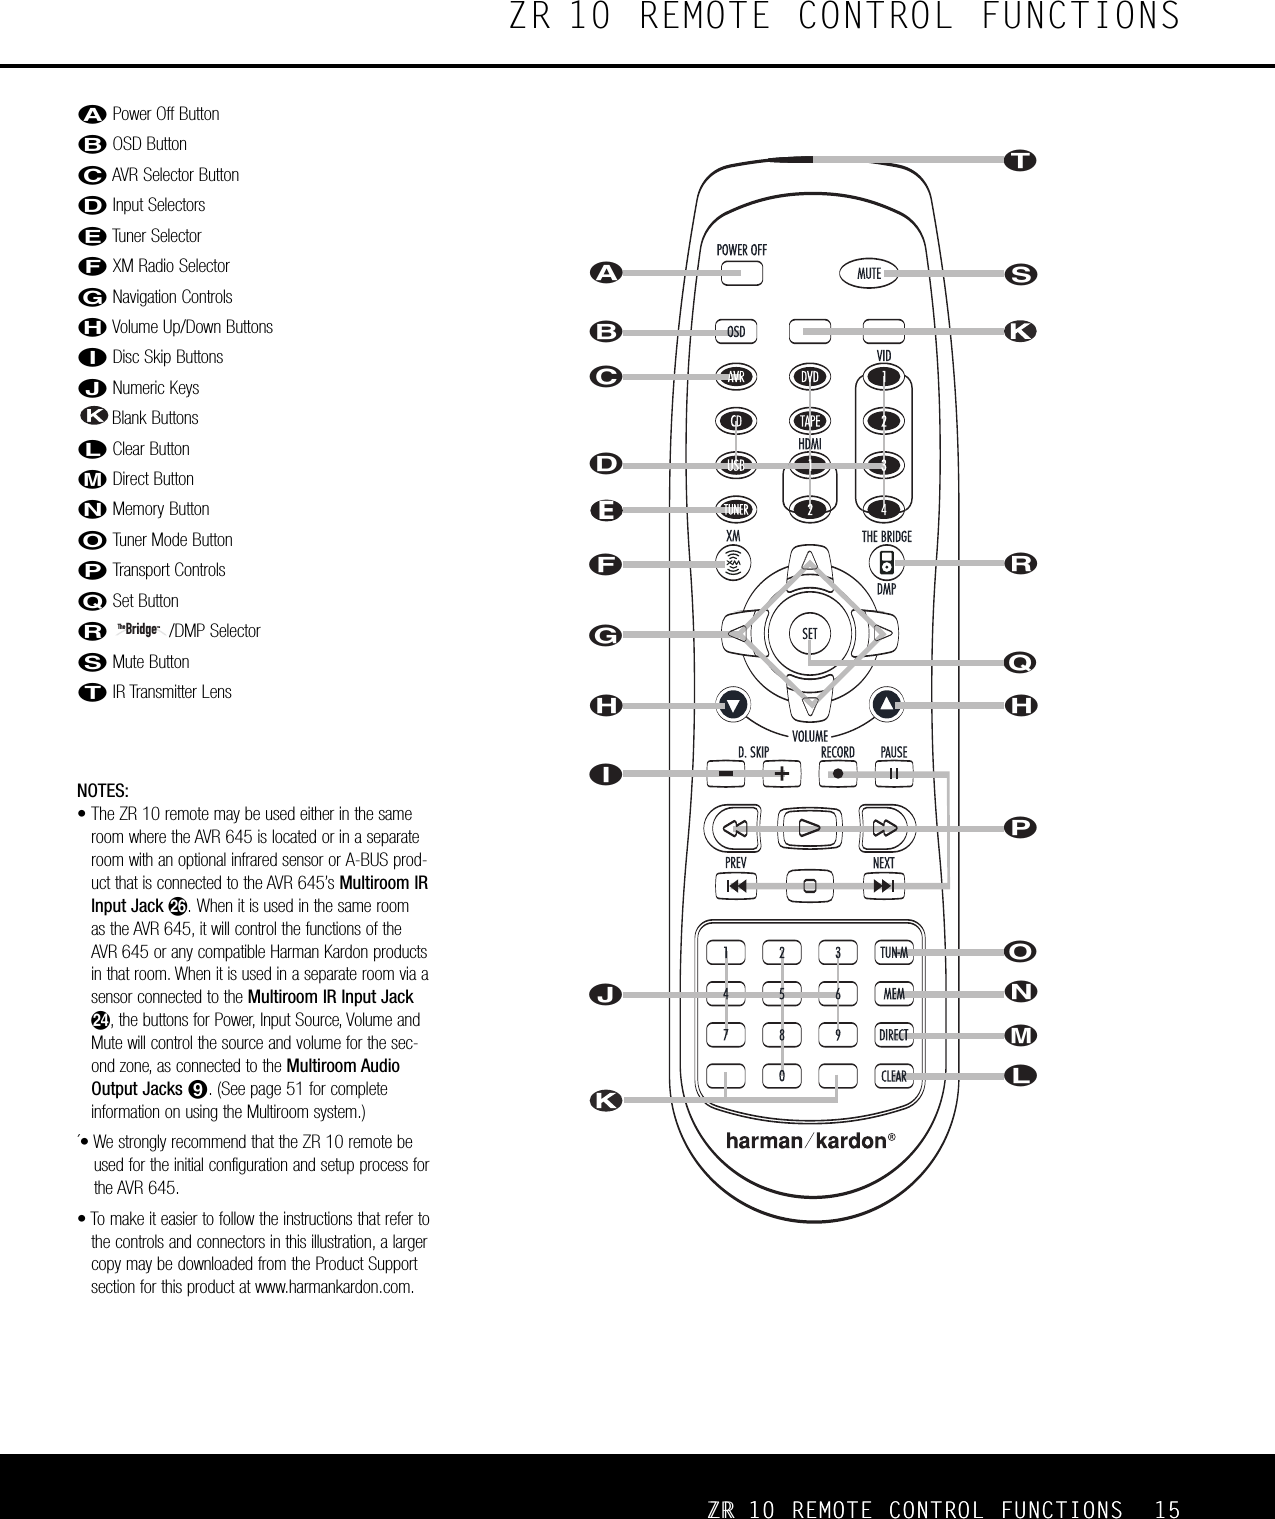 ZR 10 REMOTE CONTROL FUNCTIONSåPower Off Button∫OSD ButtonçAVR Selector Button∂Input Selectors≠Tuner SelectorƒXM Radio Selector ©Navigation Controls˙Volume Up/Down ButtonsîDisc Skip Buttons∆Numeric KeysBlank Buttons¬Clear ButtonµDirect ButtonñMemory ButtonøTuner Mode ButtonπTransport ControlsœSet Button®/DMP Selector ßMute Button†IR Transmitter Lens The BridgeTM Eå ∫ ç ∂ ƒ © ˙ î ∆ ¬ µ ñ ø π œ ® ß † E ˙ NOTES:• The ZR 10 remote may be used either in the sameroom where the AVR 645 is located or in a separateroom with an optional infrared sensor or A-BUS prod-uct that is connected to the AVR 645’s Multiroom IRInput Jack g. When it is used in the same room as the AVR 645, it will control the functions of theAVR 645 or any compatible Harman Kardon productsin that room. When it is used in a separate room via asensor connected to the Multiroom IR Input Jacke, the buttons for Power, Input Source, Volume andMute will control the source and volume for the sec-ond zone, as connected to the Multiroom AudioOutput Jacks ª. (See page 51 for complete information on using the Multiroom system.)´• We strongly recommend that the ZR 10 remote beused for the initial configuration and setup process forthe AVR 645.• To make it easier to follow the instructions that refer tothe controls and connectors in this illustration, a largercopy may be downloaded from the Product Supportsection for this product at www.harmankardon.com.ZR 10 REMOTE CONTROL FUNCTIONS 15ZR 10 REMOTE CONTROL FUNCTIONS 15